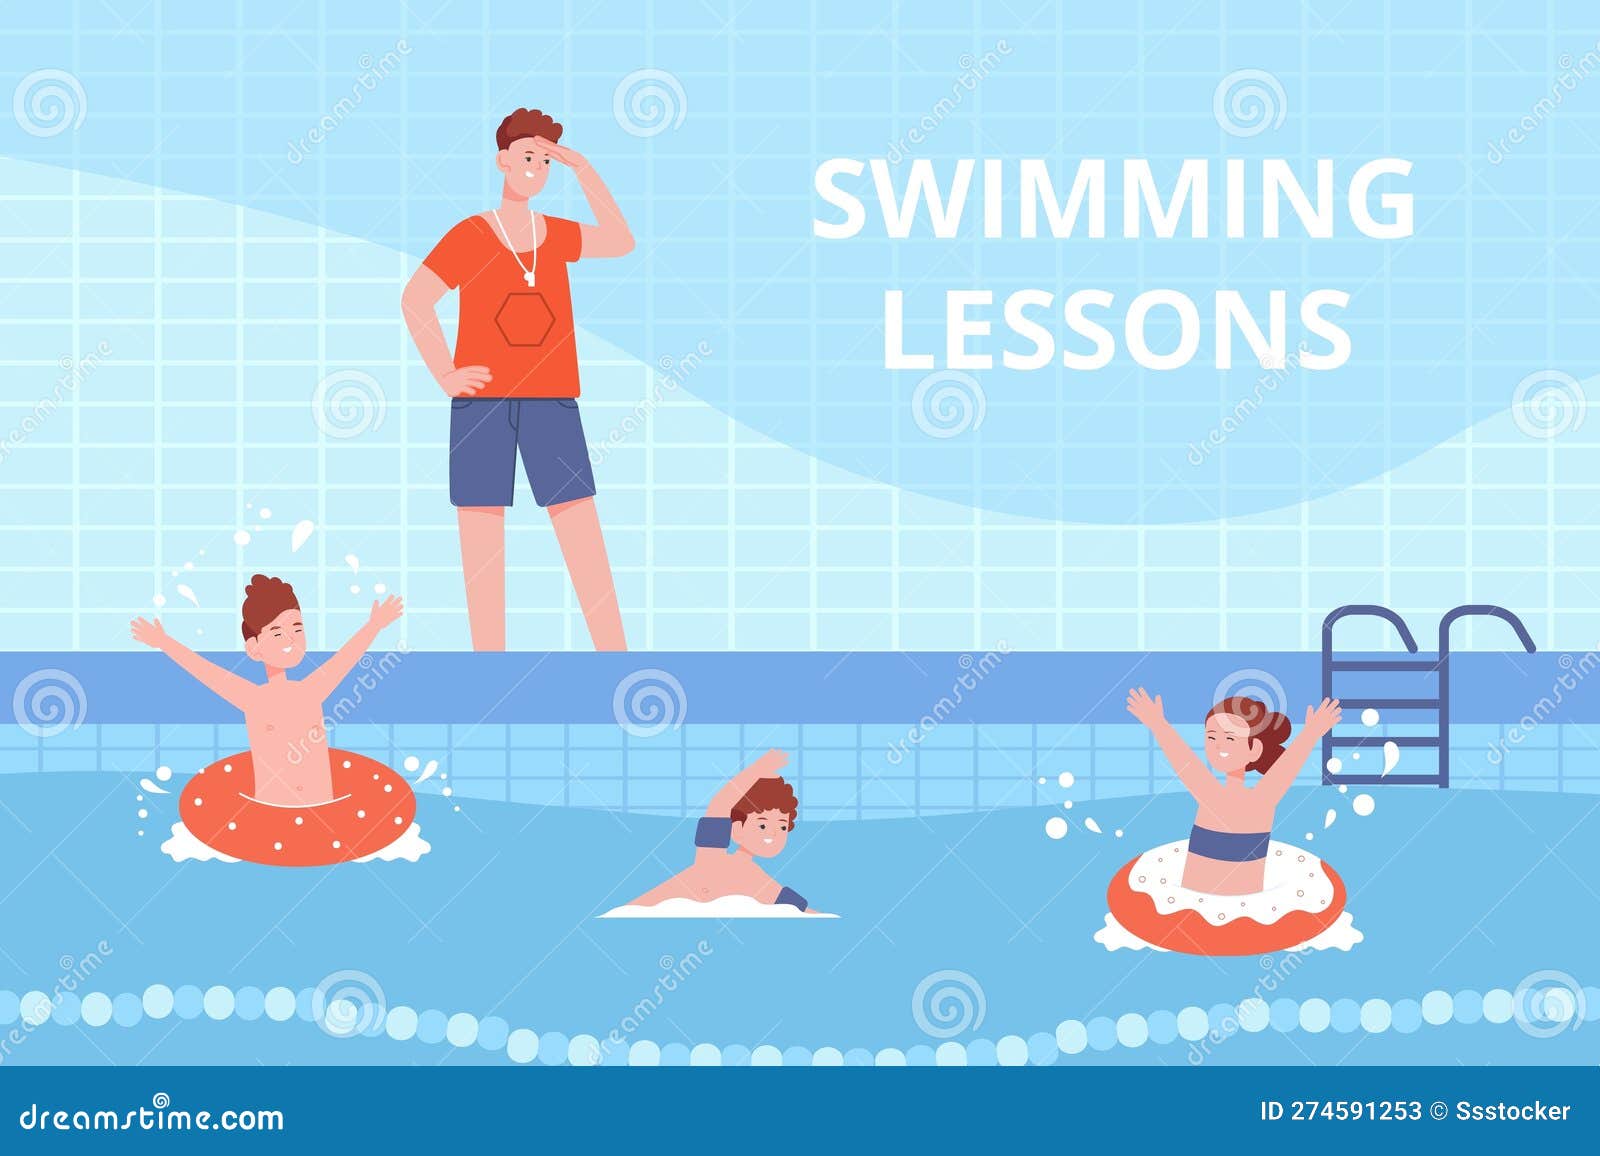 Learn How To Swim For Beginners Infographic Vector Illustration ...